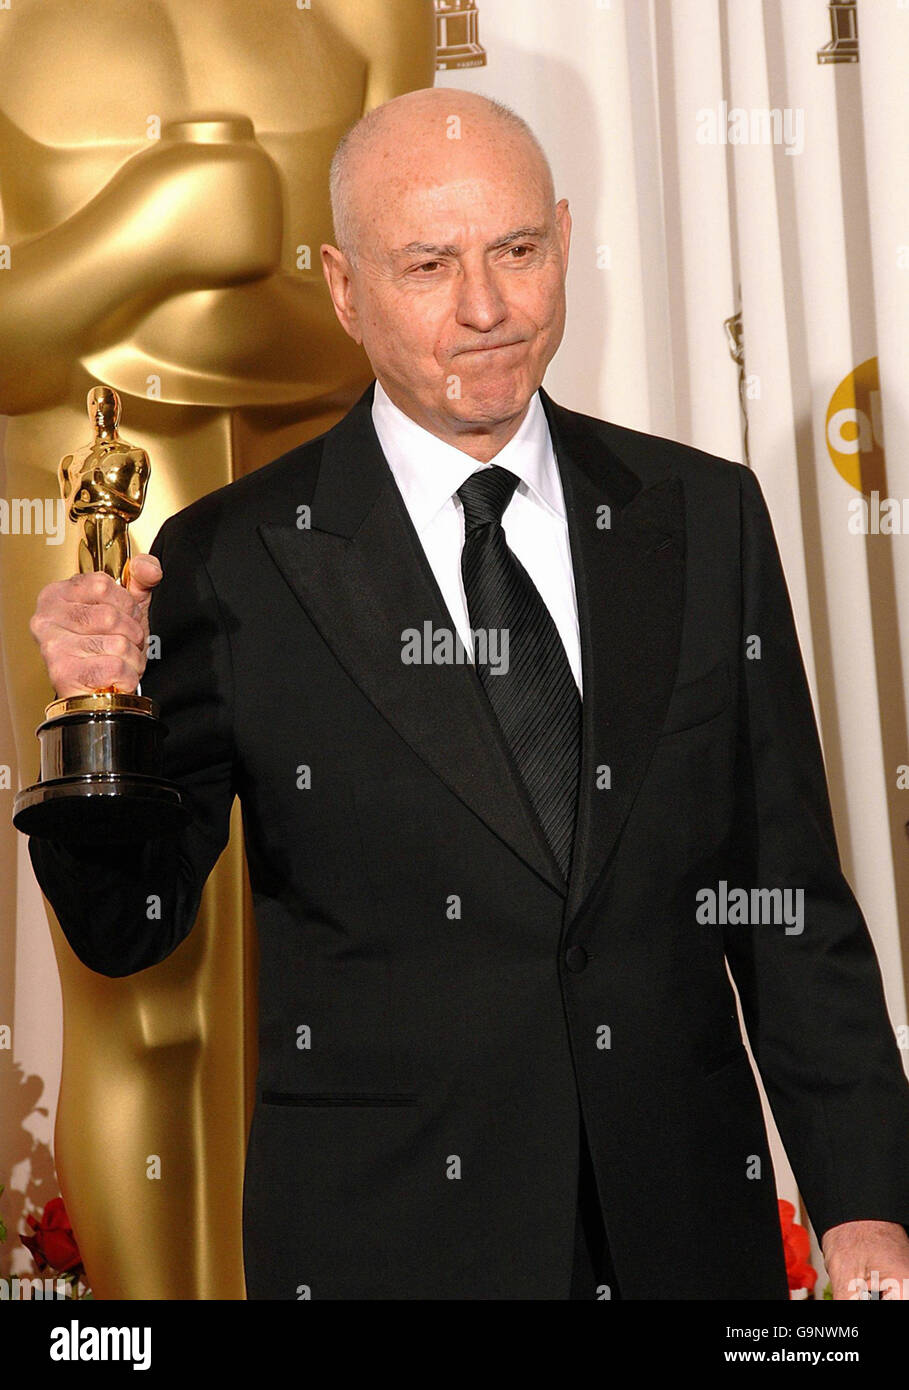 Alan Arkin with the award for Best Supporting Actor (for Little Miss Sunshine) during the 79th Academy Awards (Oscars) at the Kodak Theatre, Los Angeles. Stock Photo